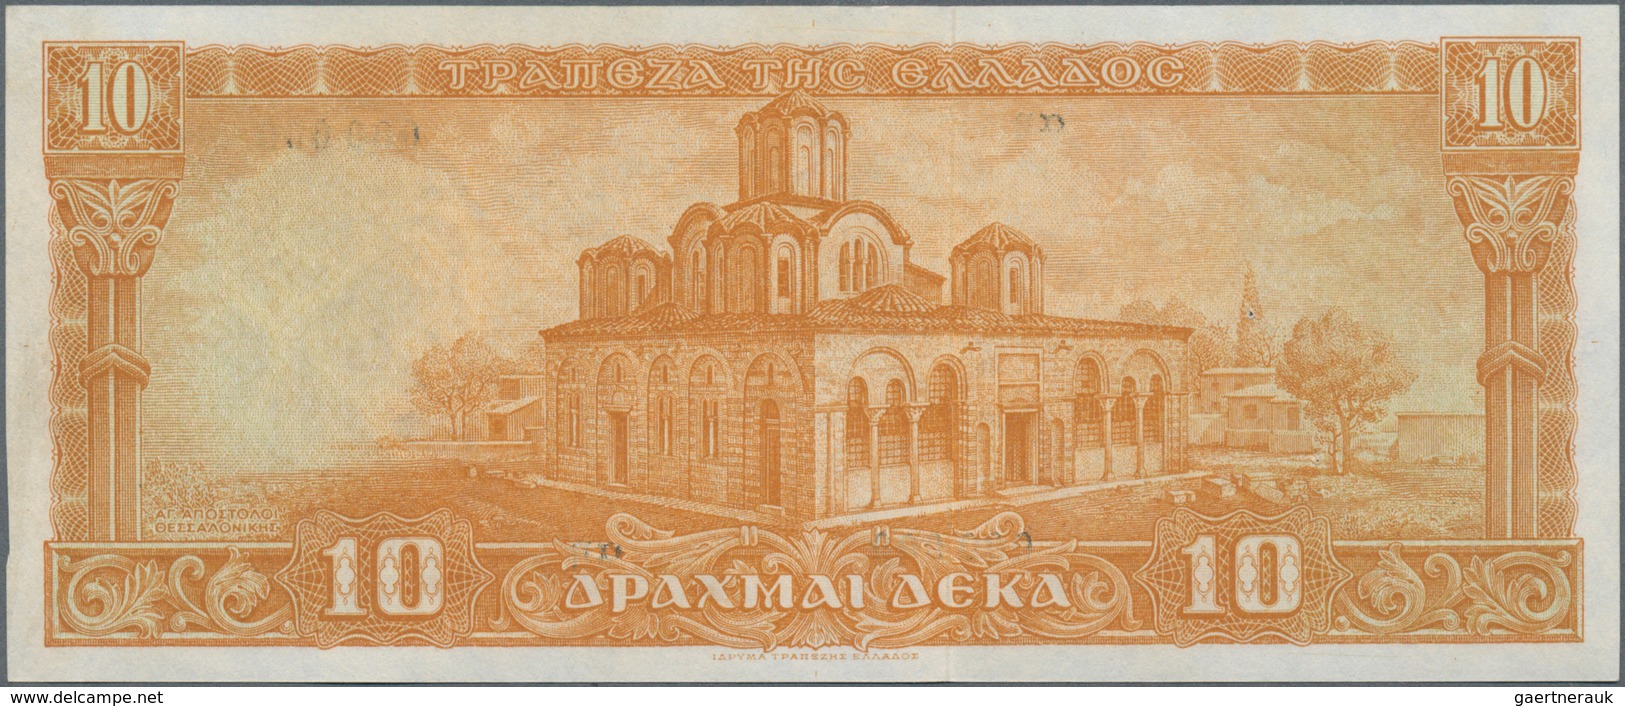 Greece / Griechenland: 10 Drachmai 1954 SPECIMEN, P.189as, Serial Number 000000 And Red Overprint "S - Griechenland